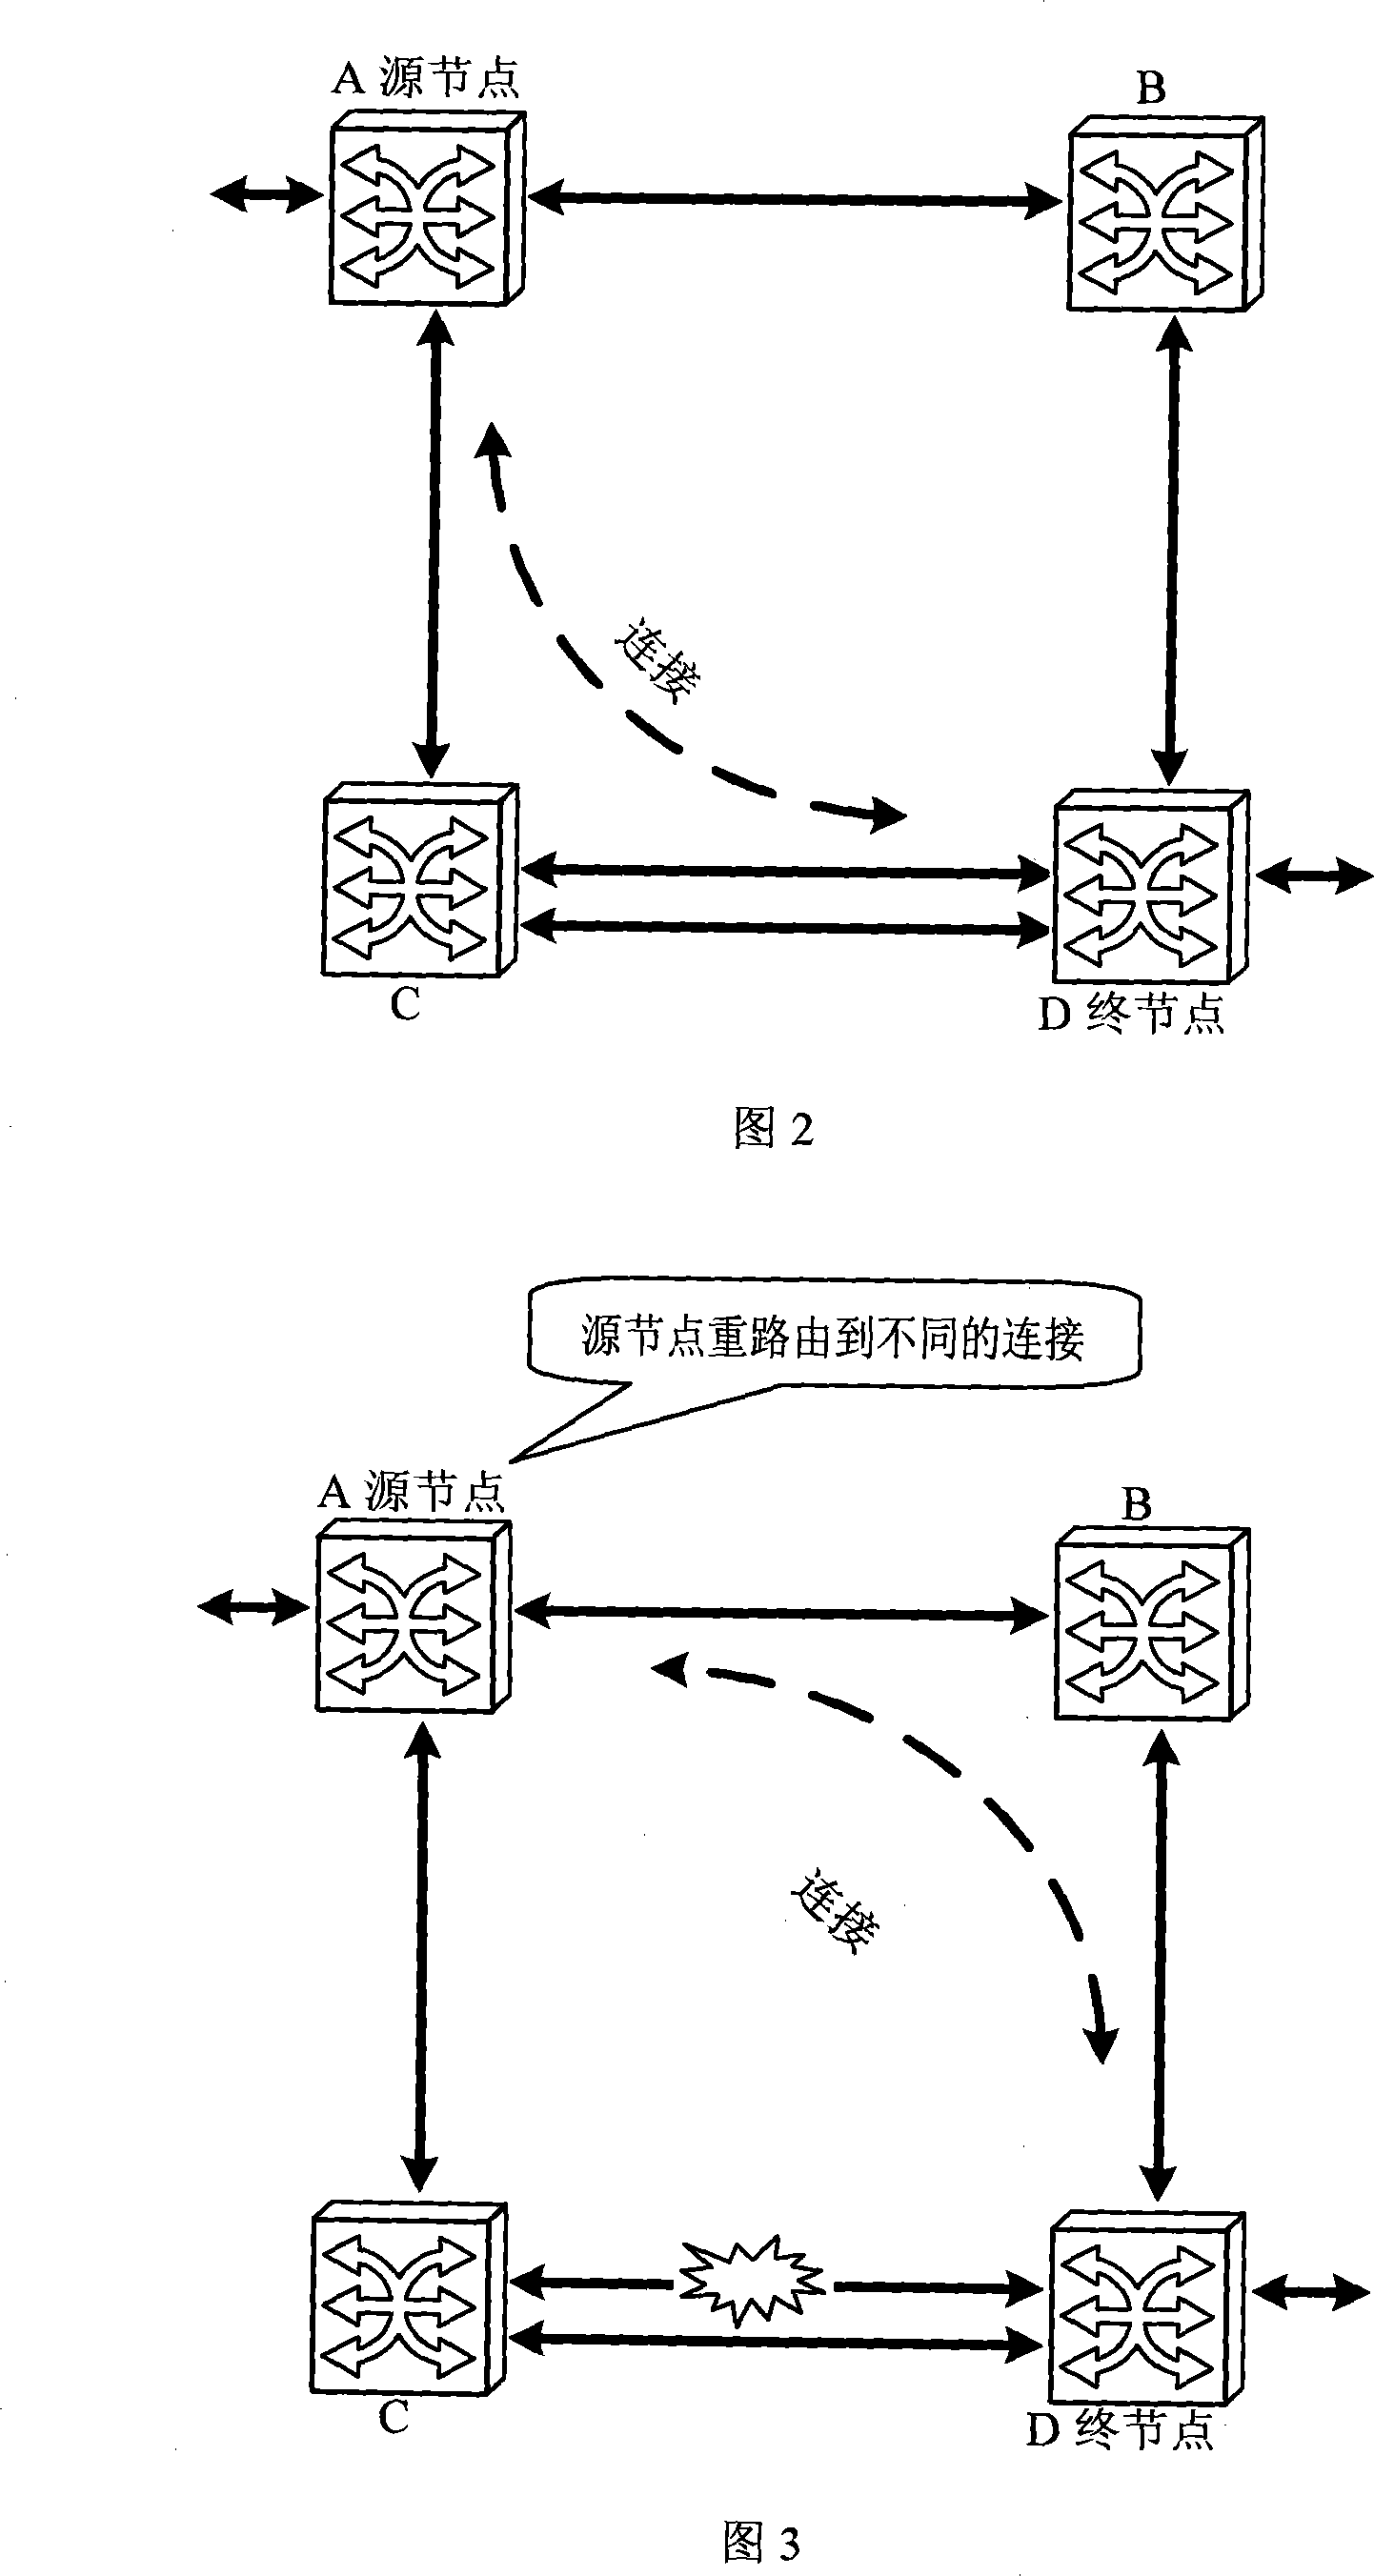 Method for recovering local span mesh network in automatic exchanging optical network